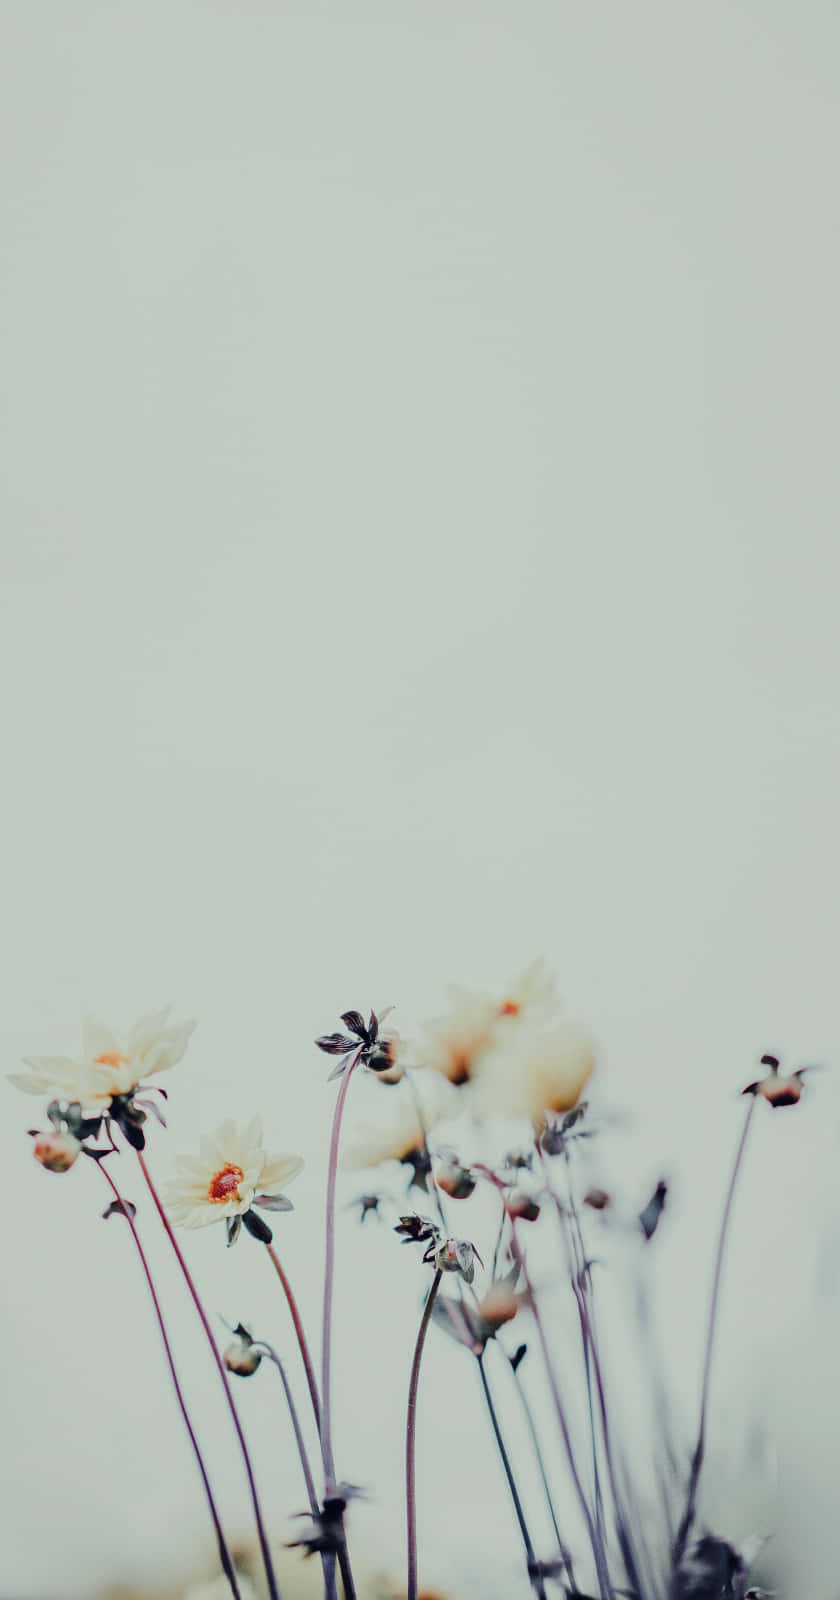 Embrace nature's beauty with this floral aesthetic phone wallpaper. Wallpaper